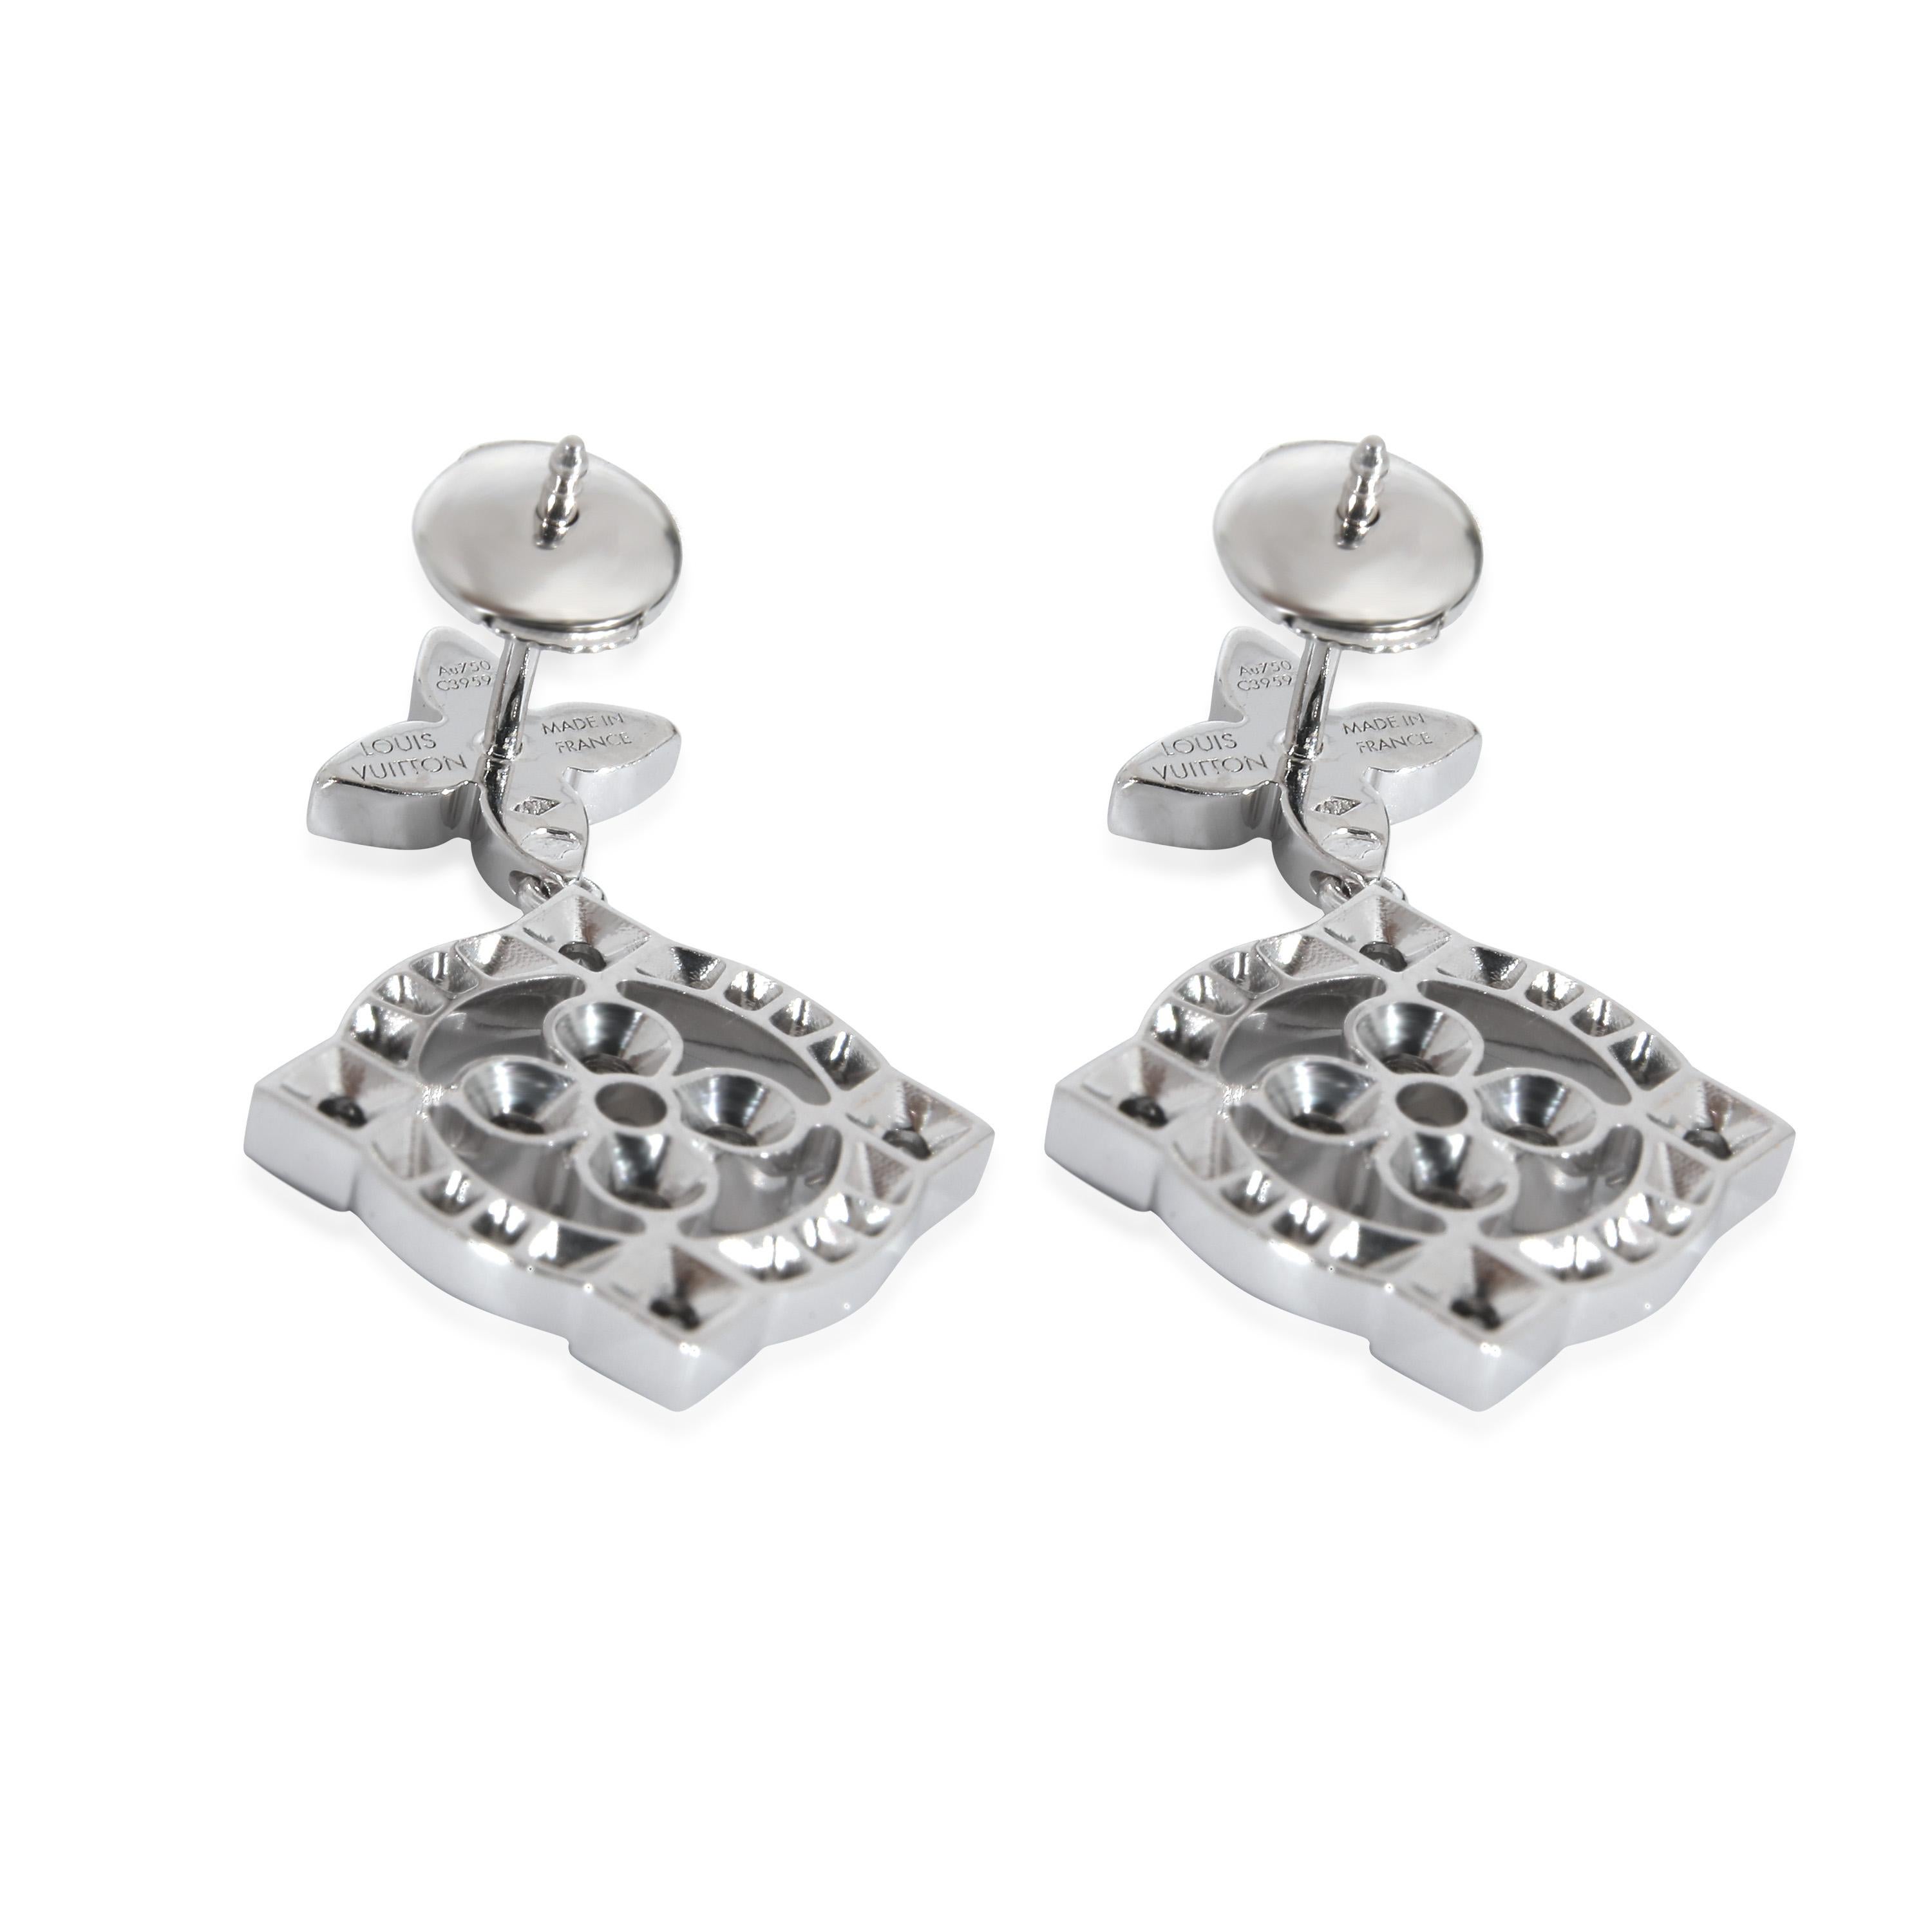 Louis Vuitton Dentelle Earrings in 18K White Gold 0.80 Ctw

PRIMARY DETAILS
SKU: 133393
Listing Title: Louis Vuitton Dentelle Earrings in 18K White Gold 0.80 Ctw
Condition Description: Retails for 13800 USD. In excellent condition and recently